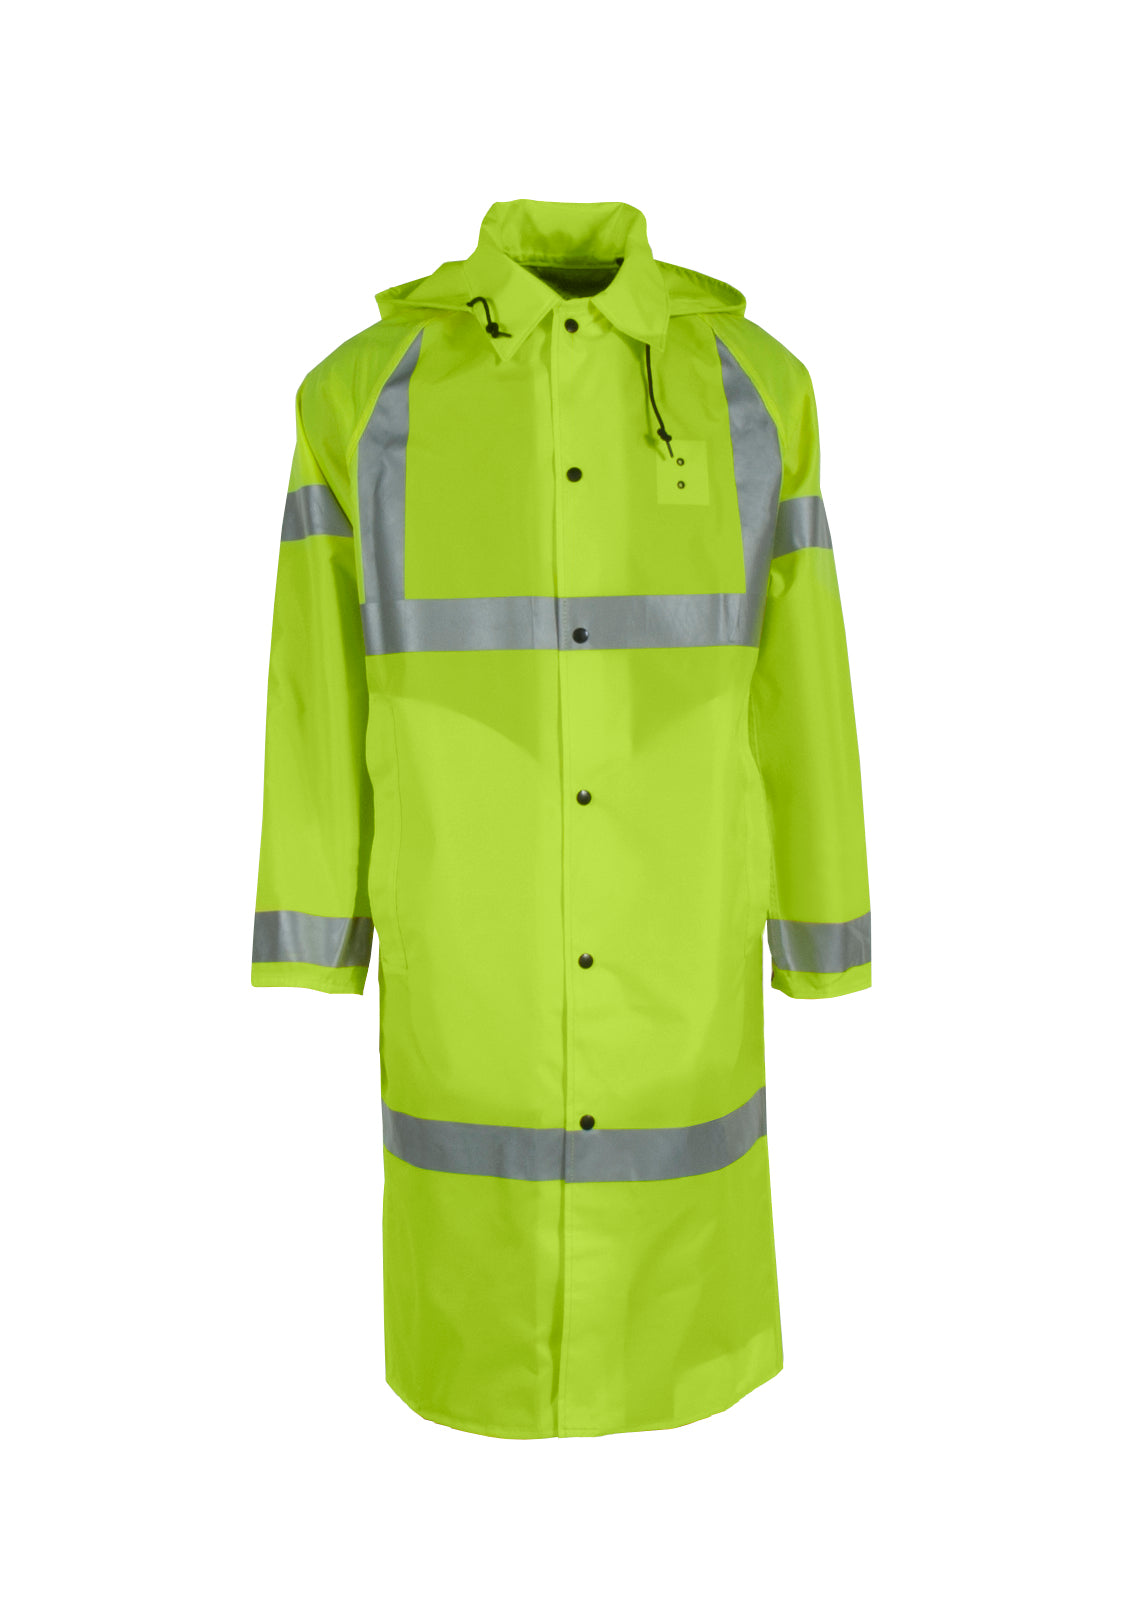 Neese 485CH Lightweight High Visibility Coat-eSafety Supplies, Inc